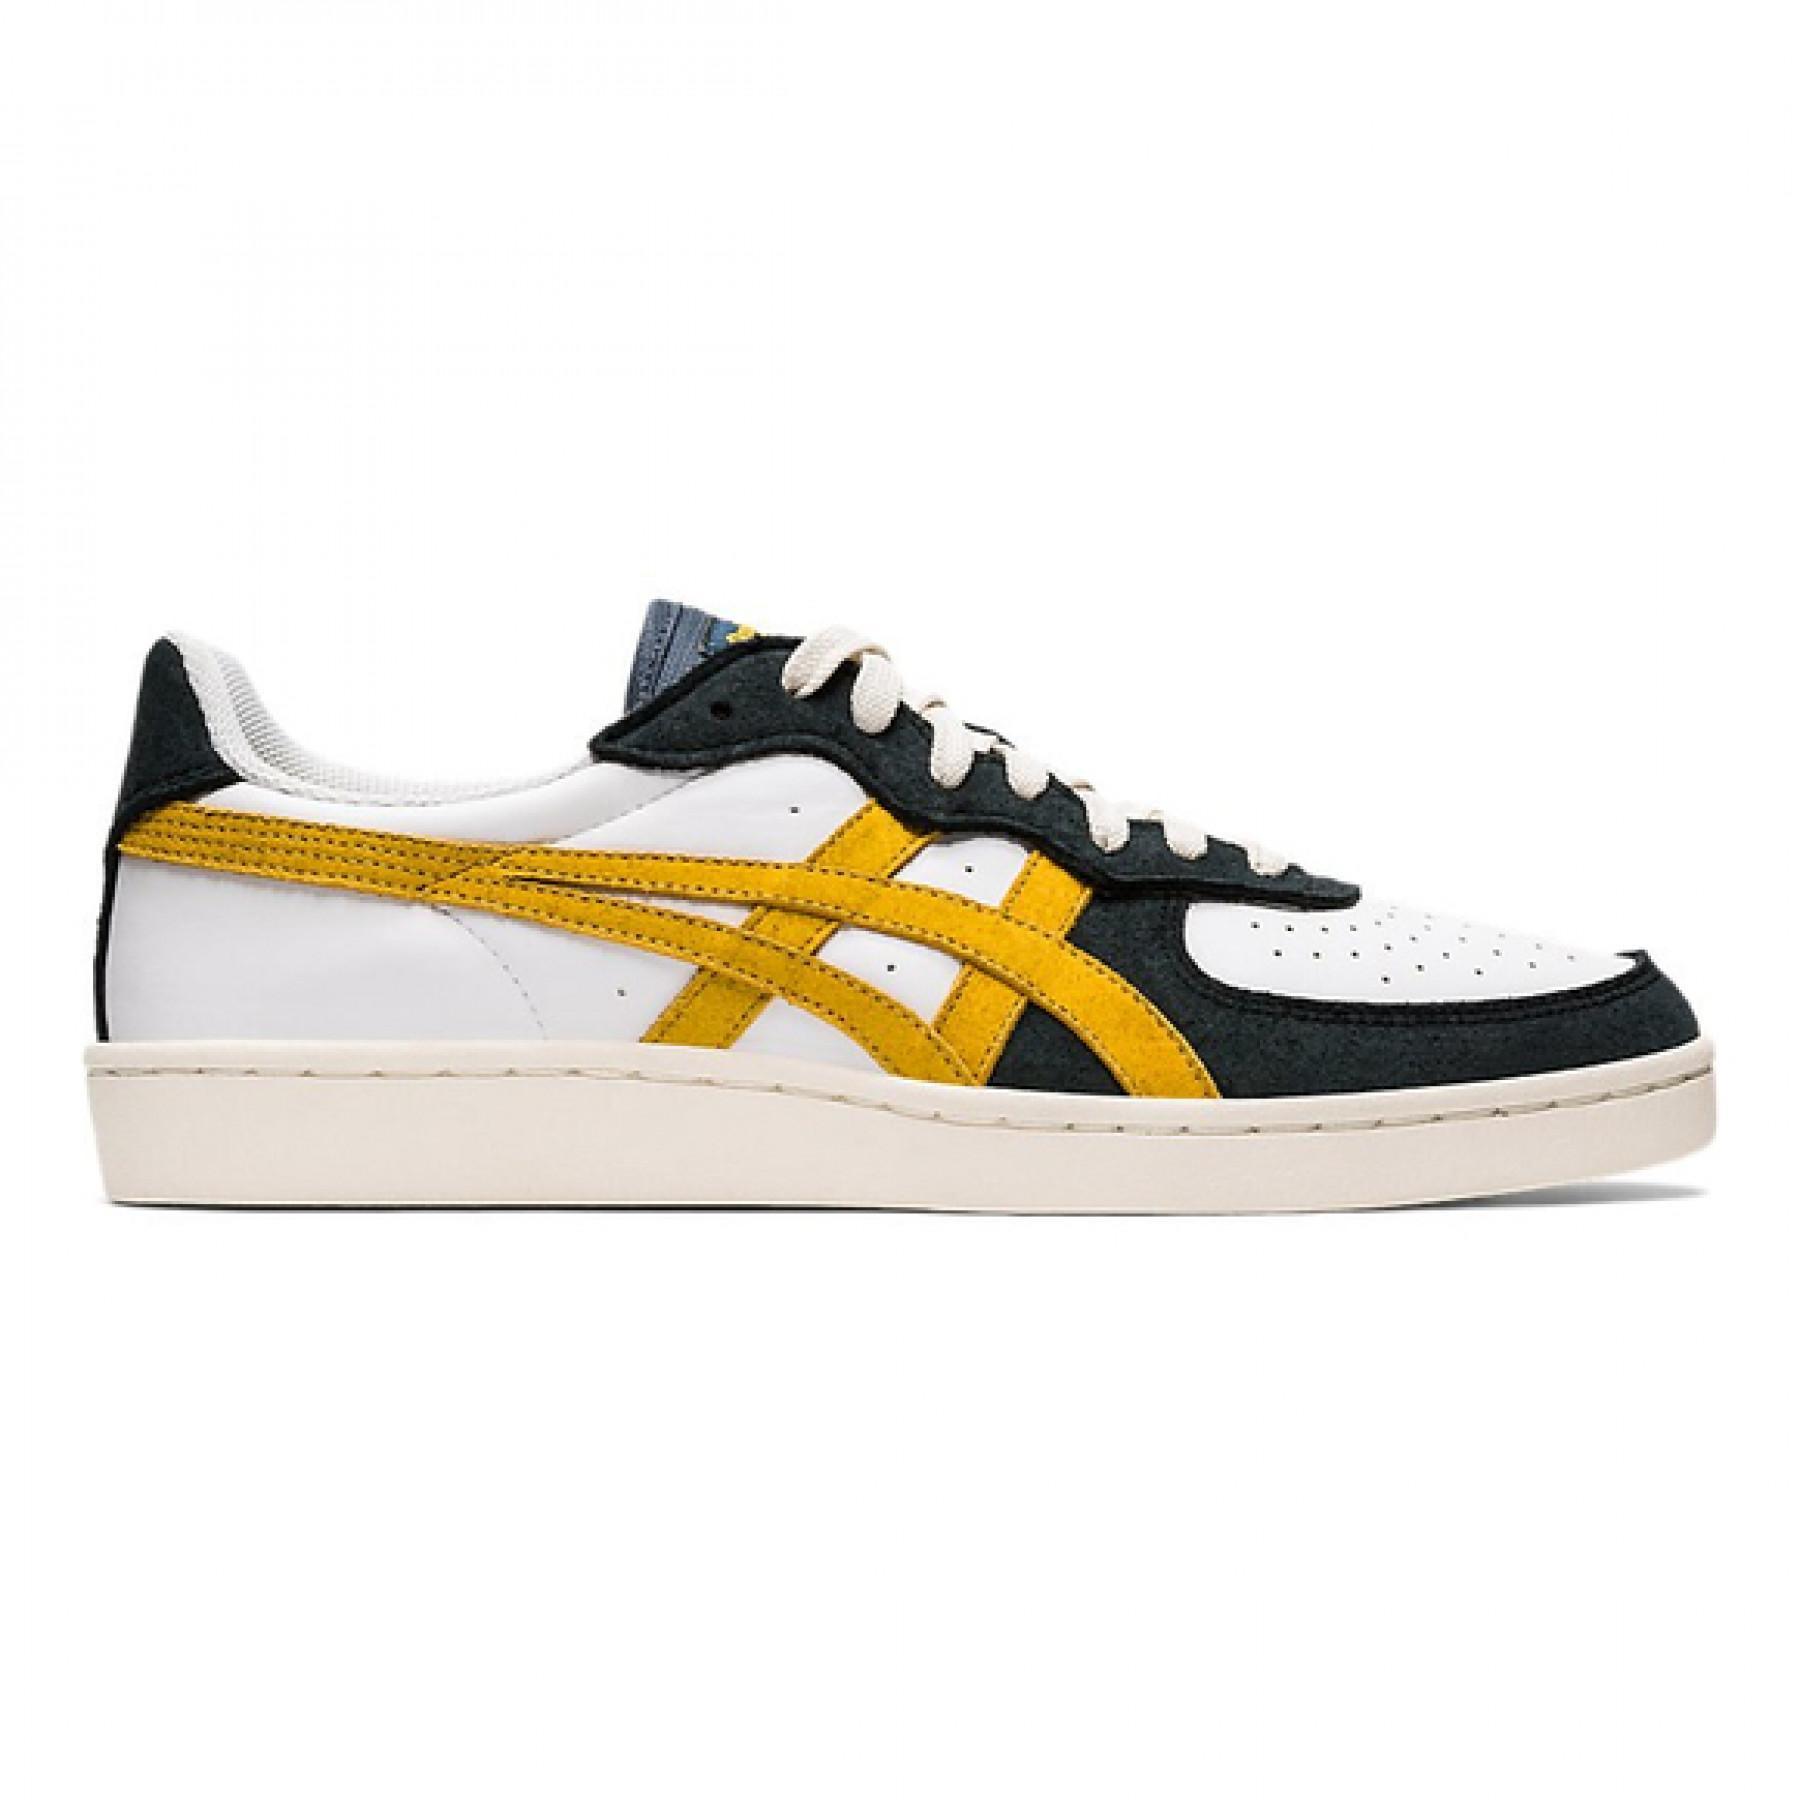 Children's sneakers Onitsuka Tiger GSM - Others - Top Brands - Women